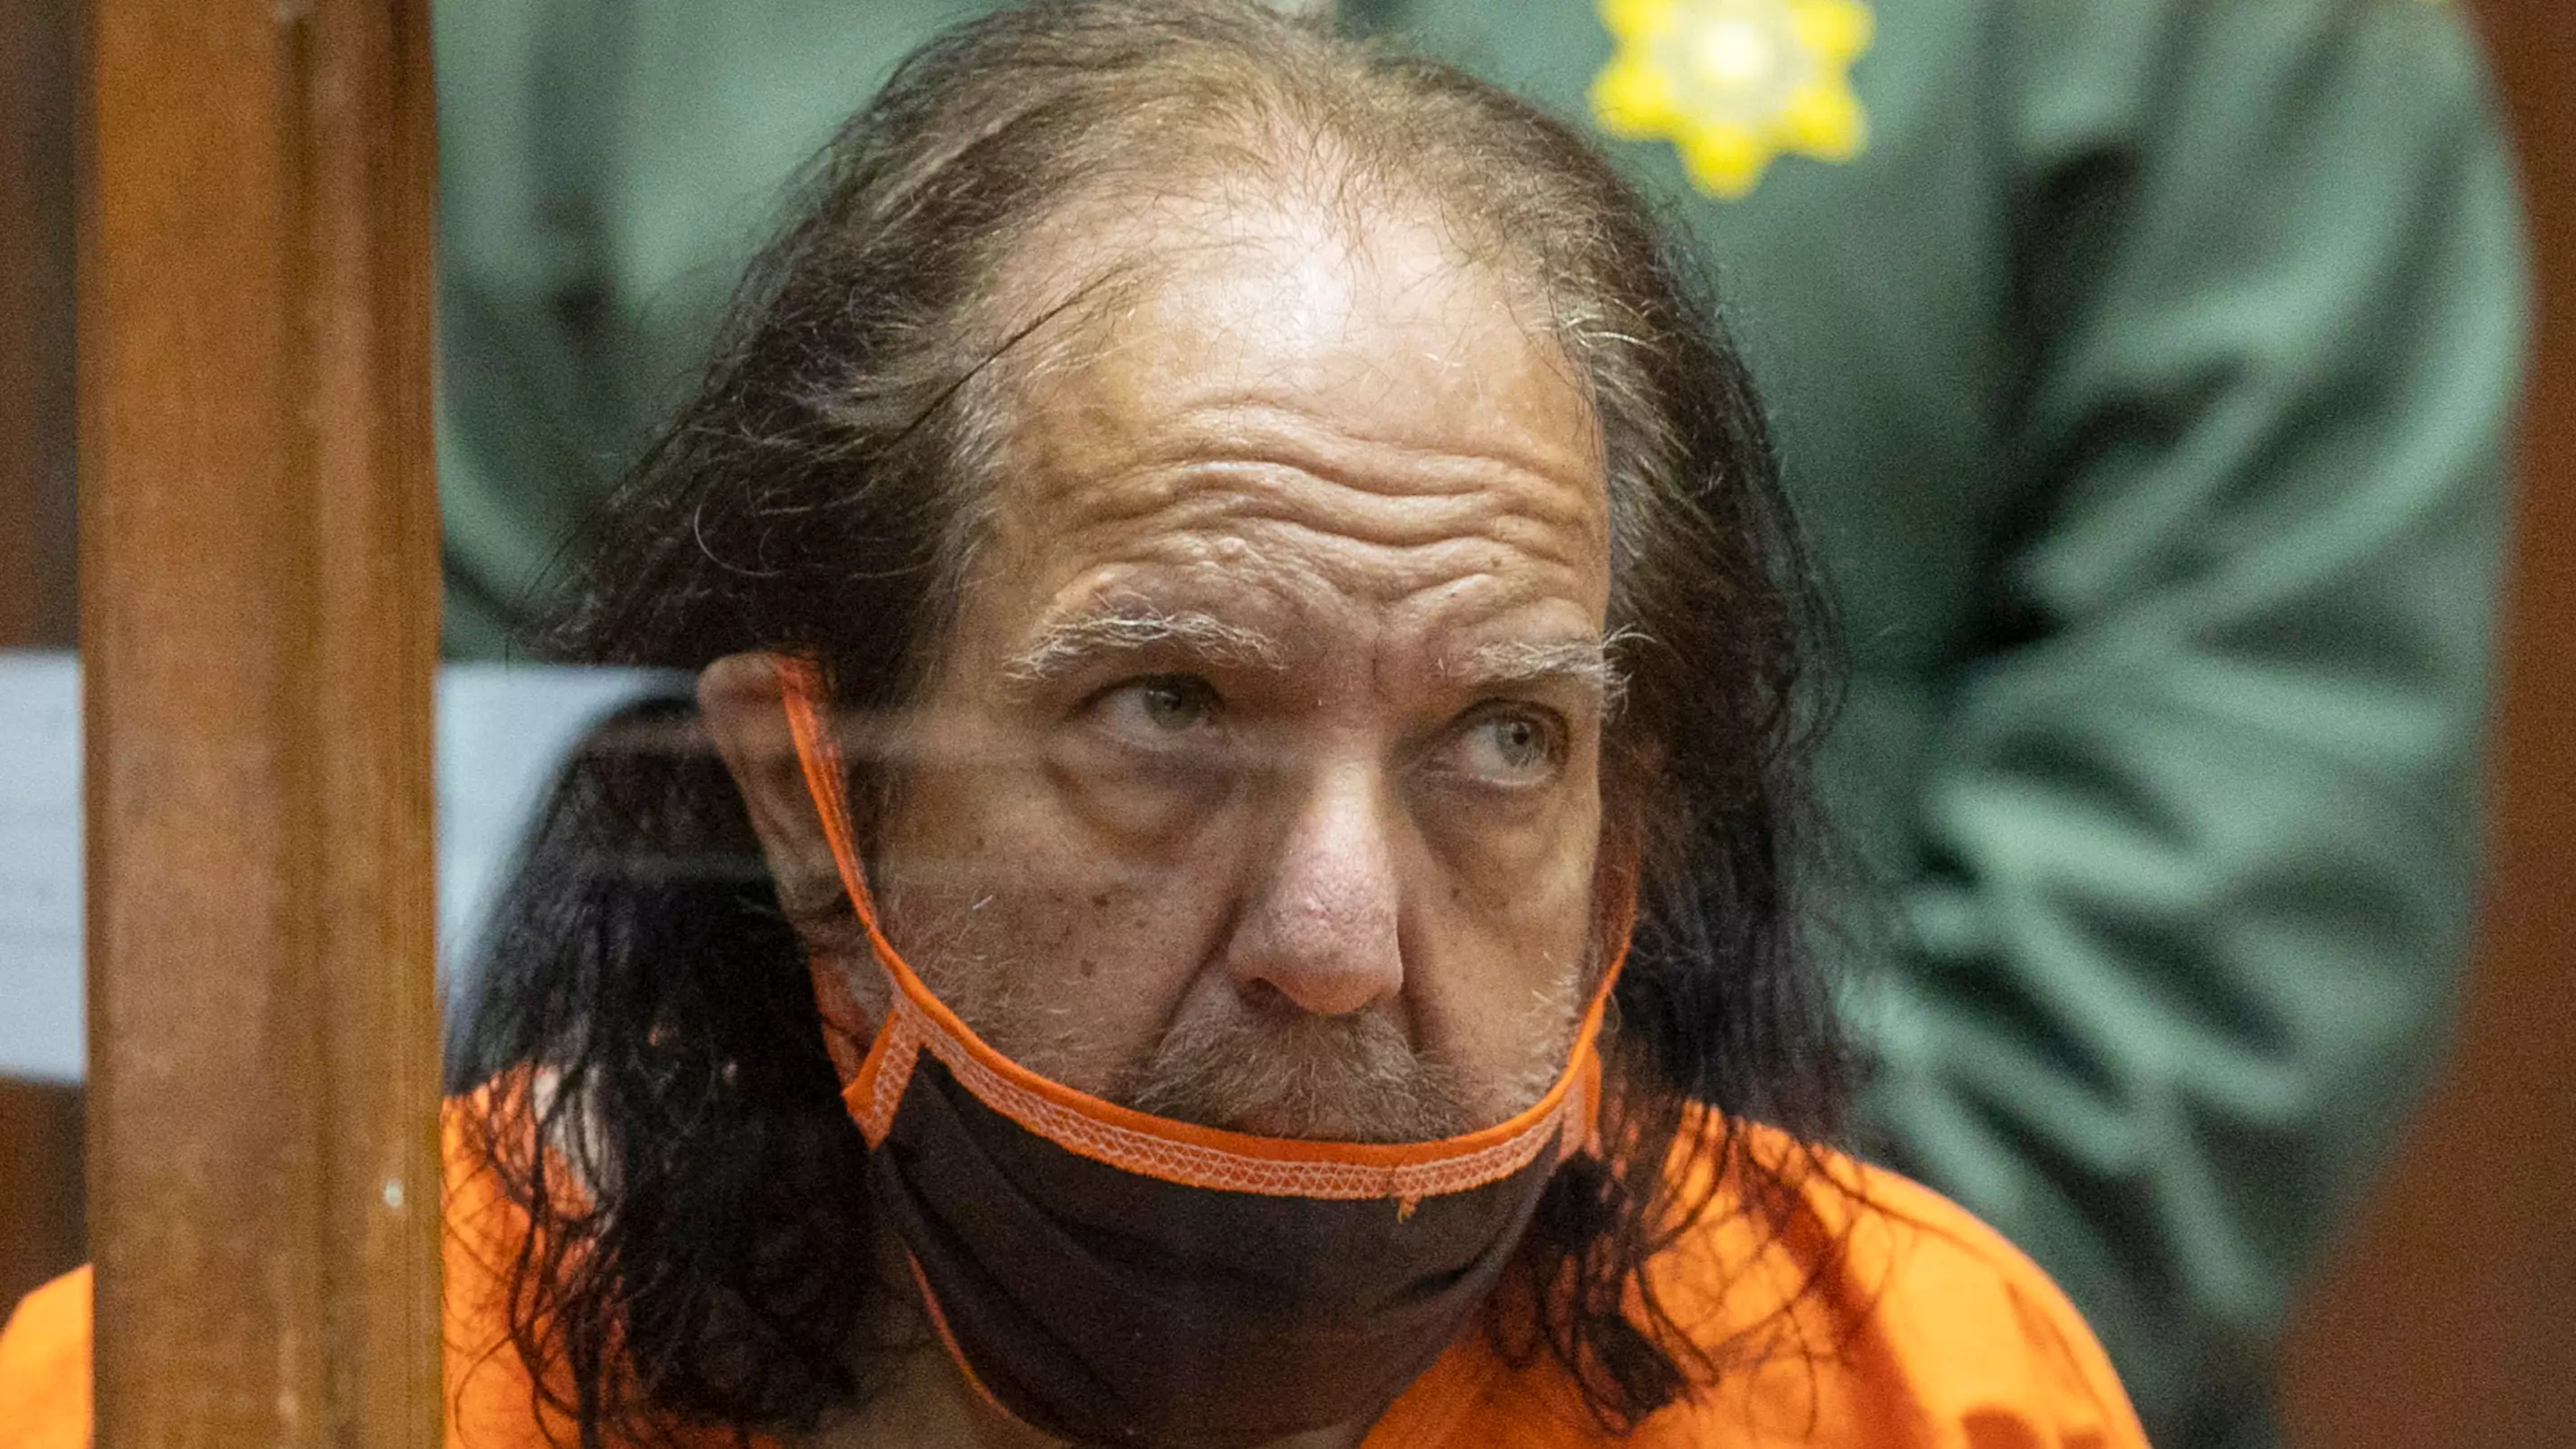 Porn Star Ron Jeremy Has Been Charged With Sexually Assaulting 17 Women